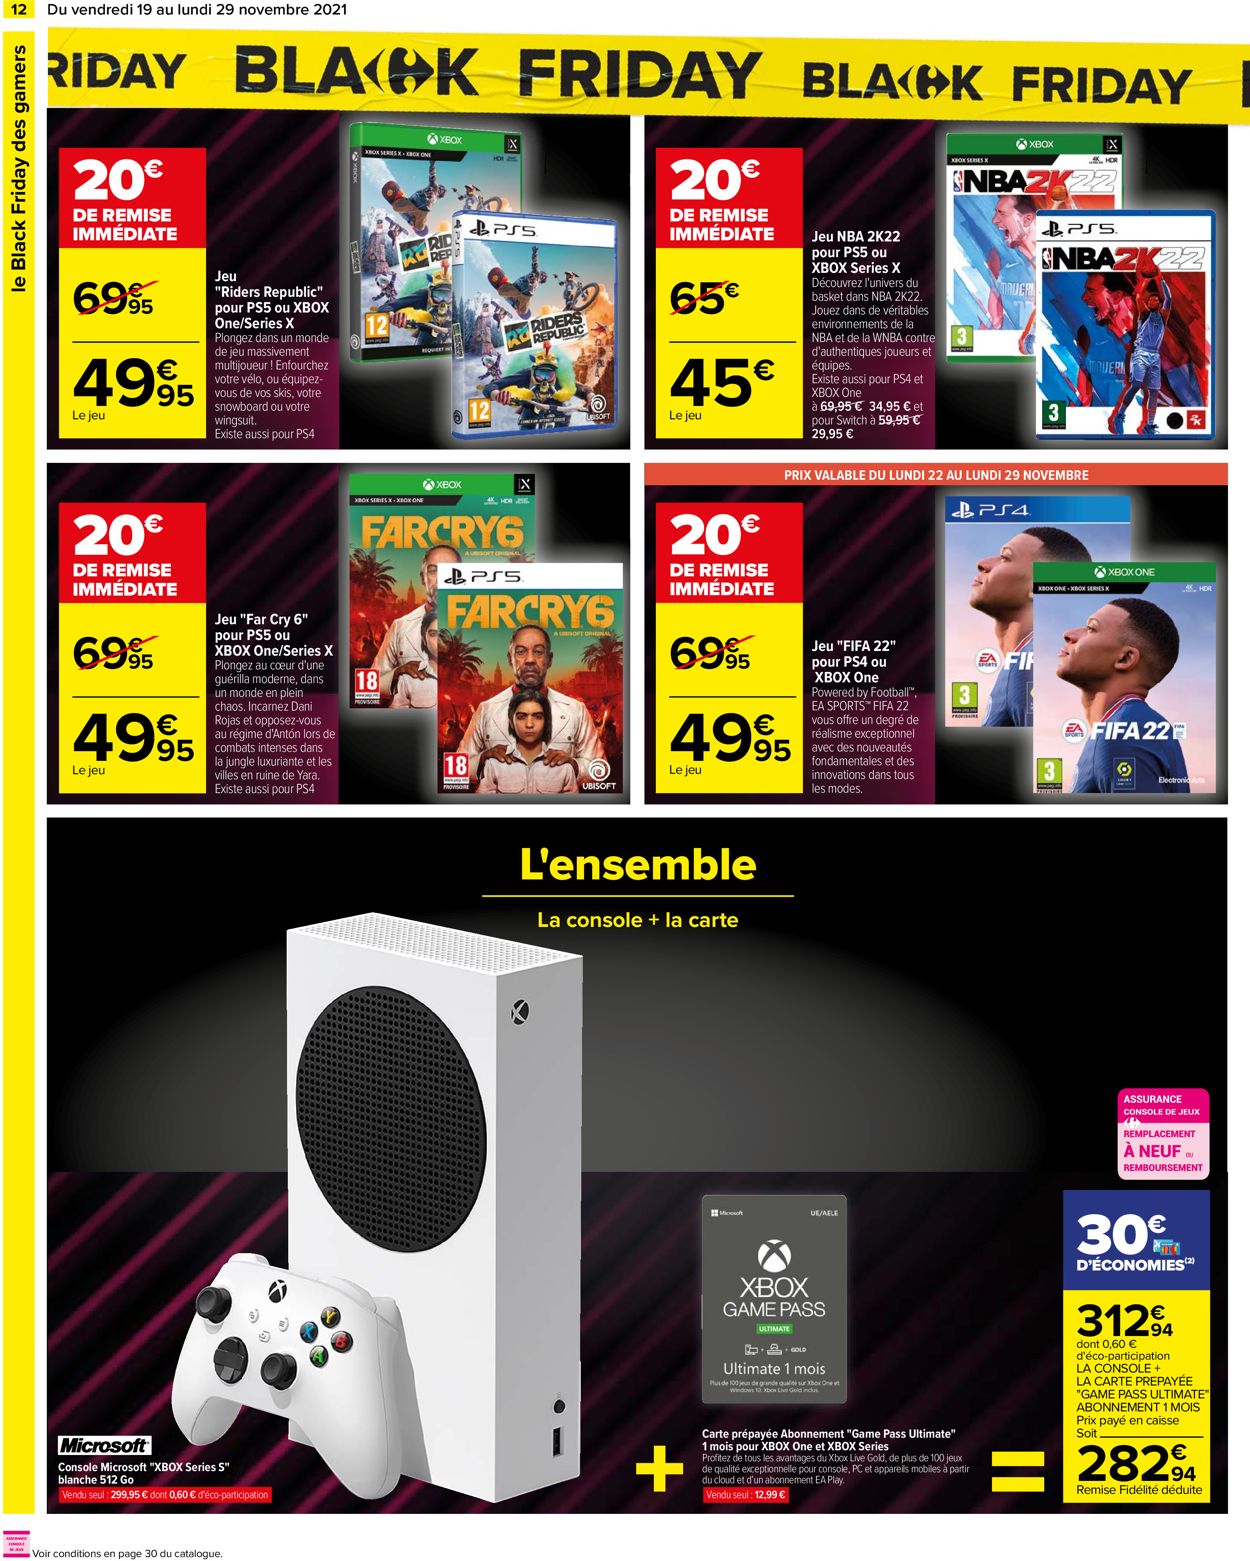 Carrefour BLACK WEEK 2021 Catalogue - 19.11-29.11.2021 (Page 12)